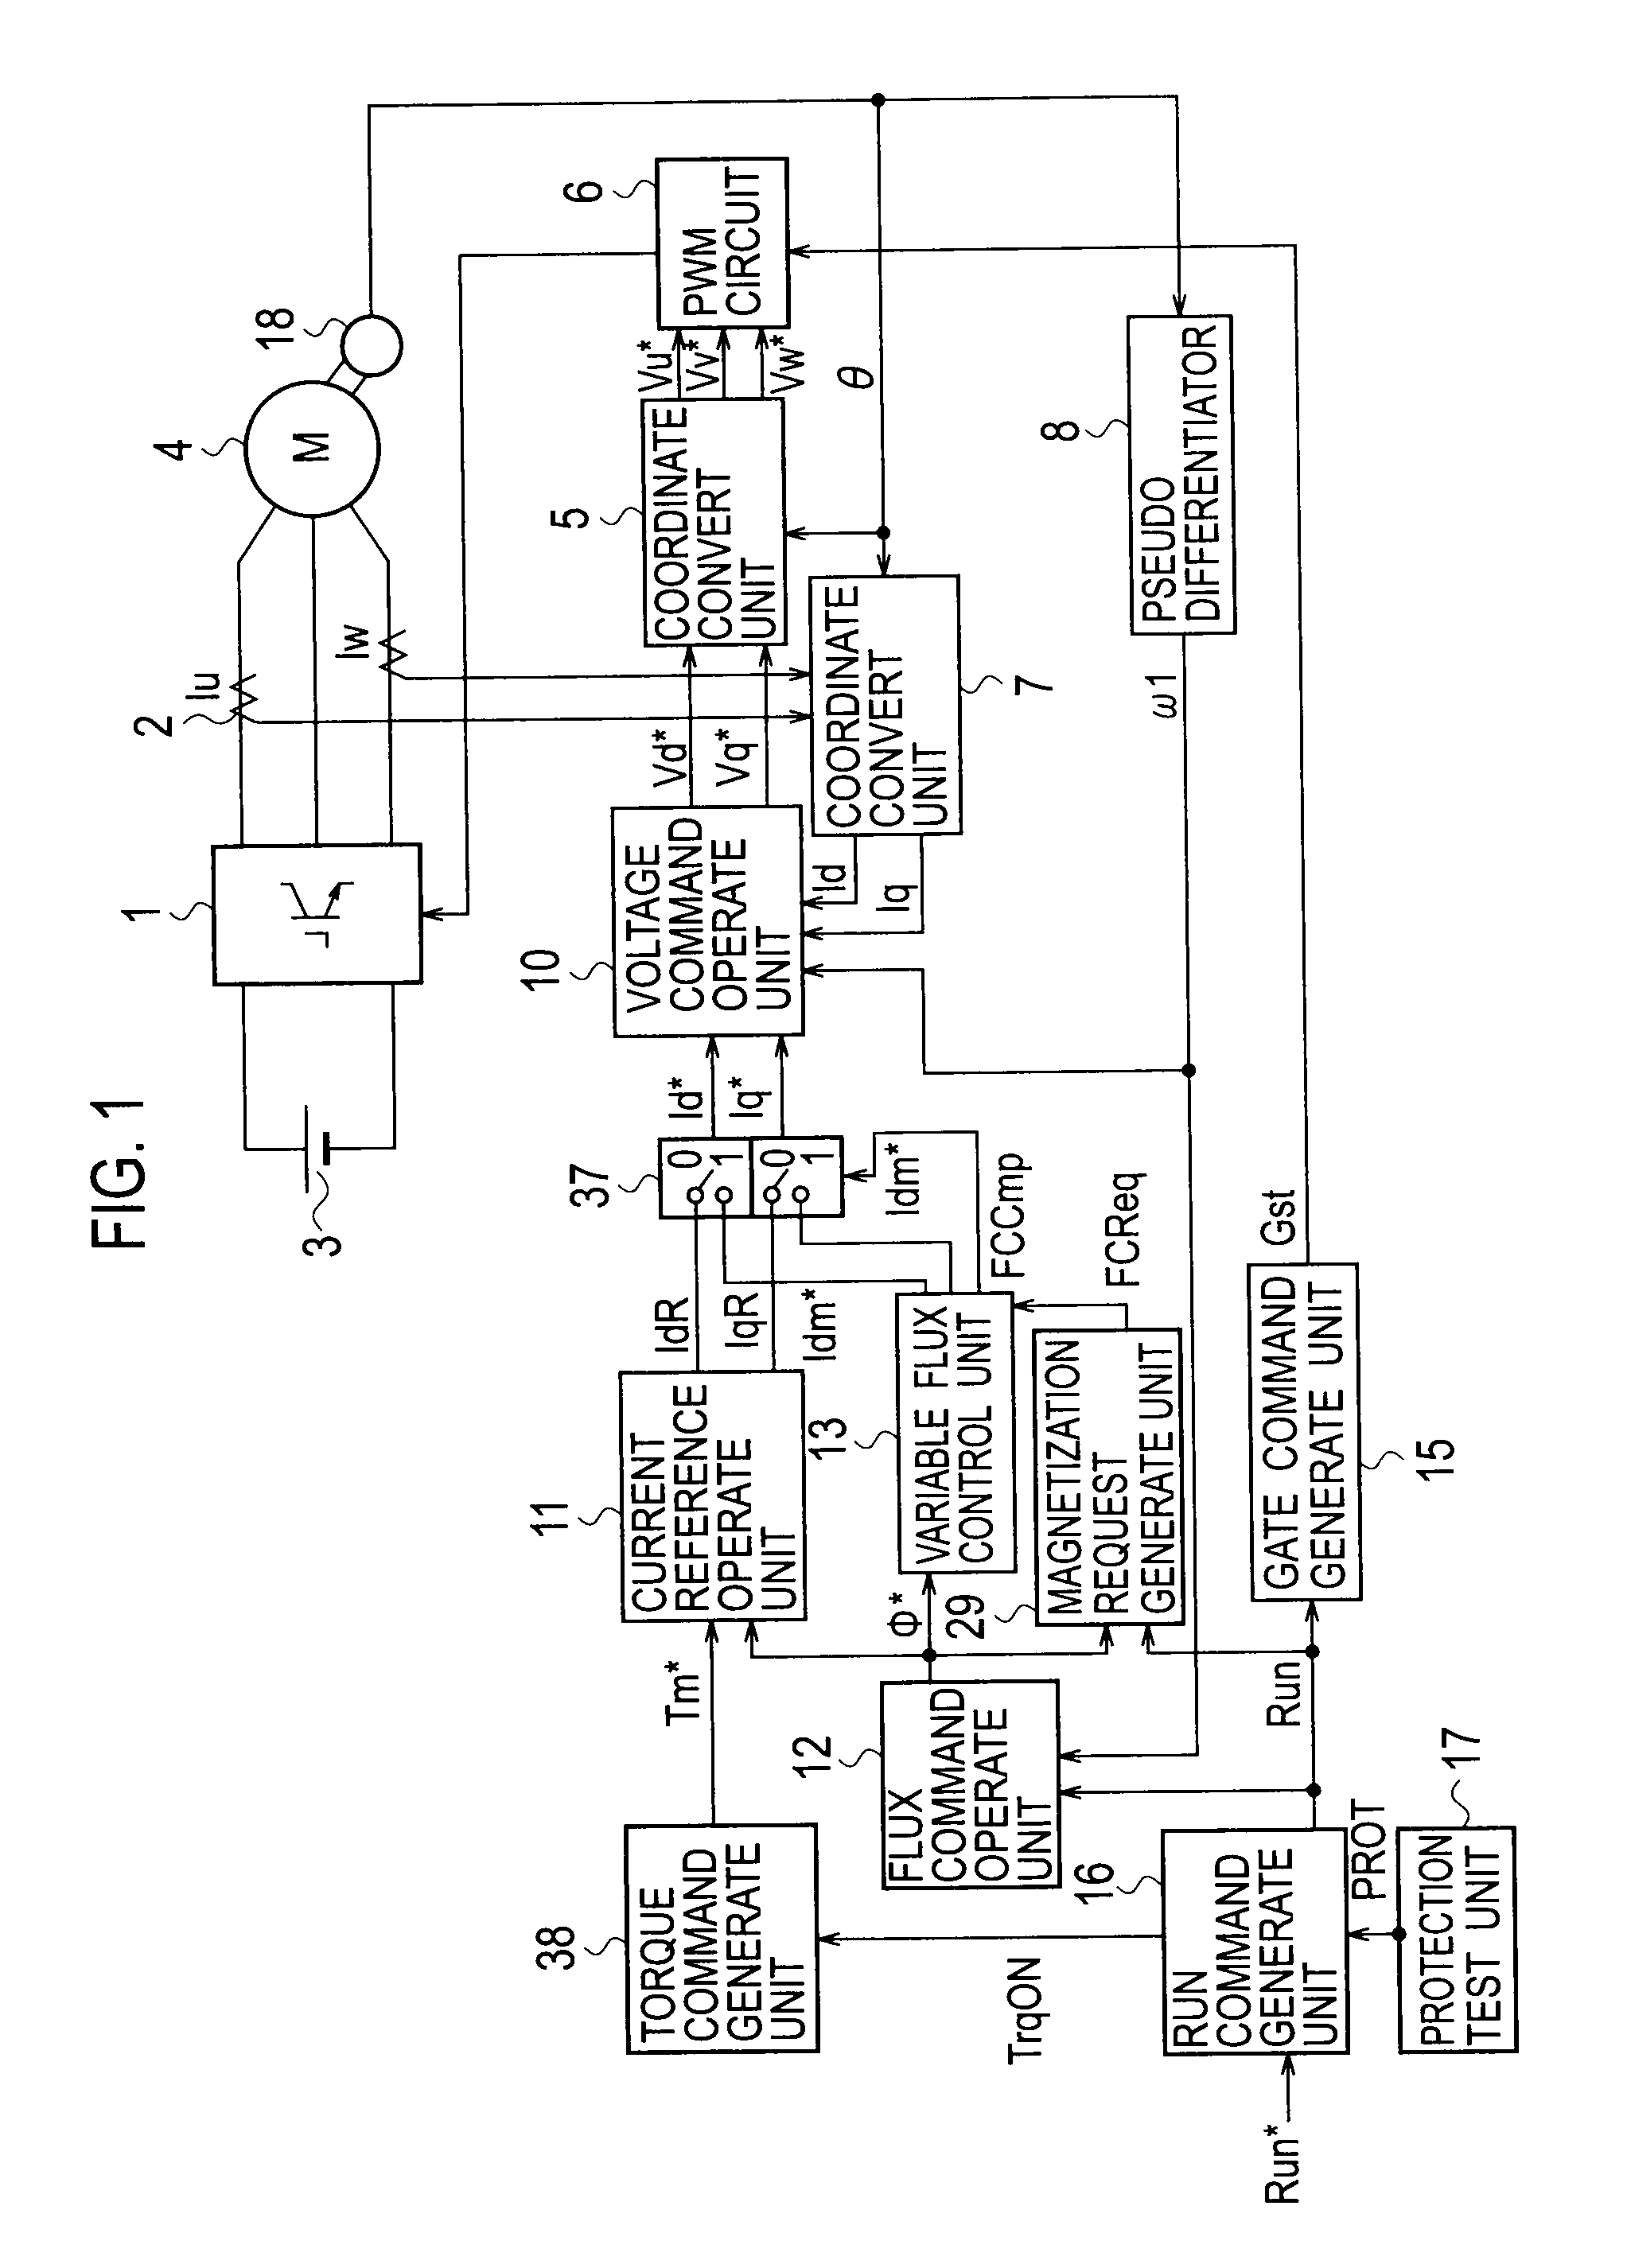 Variable-flux motor drive system